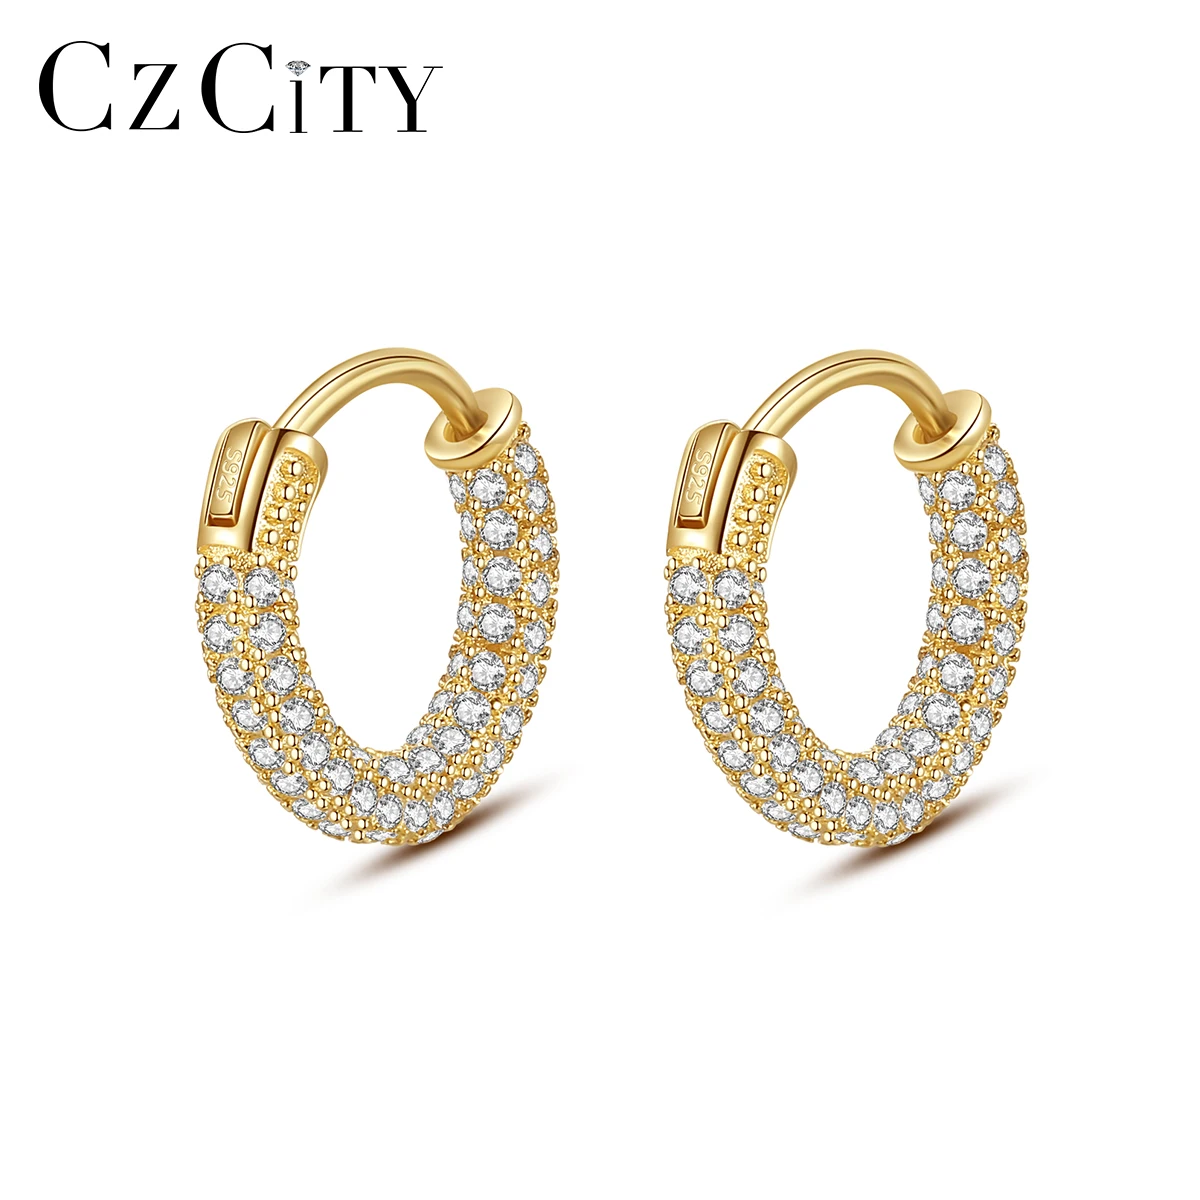 

CZCITY Luxury Sterling Silver Clip On Hoop Earrings for Women Cubic Zirconia Round Huggies Circle Pendientes Christmas Gifts